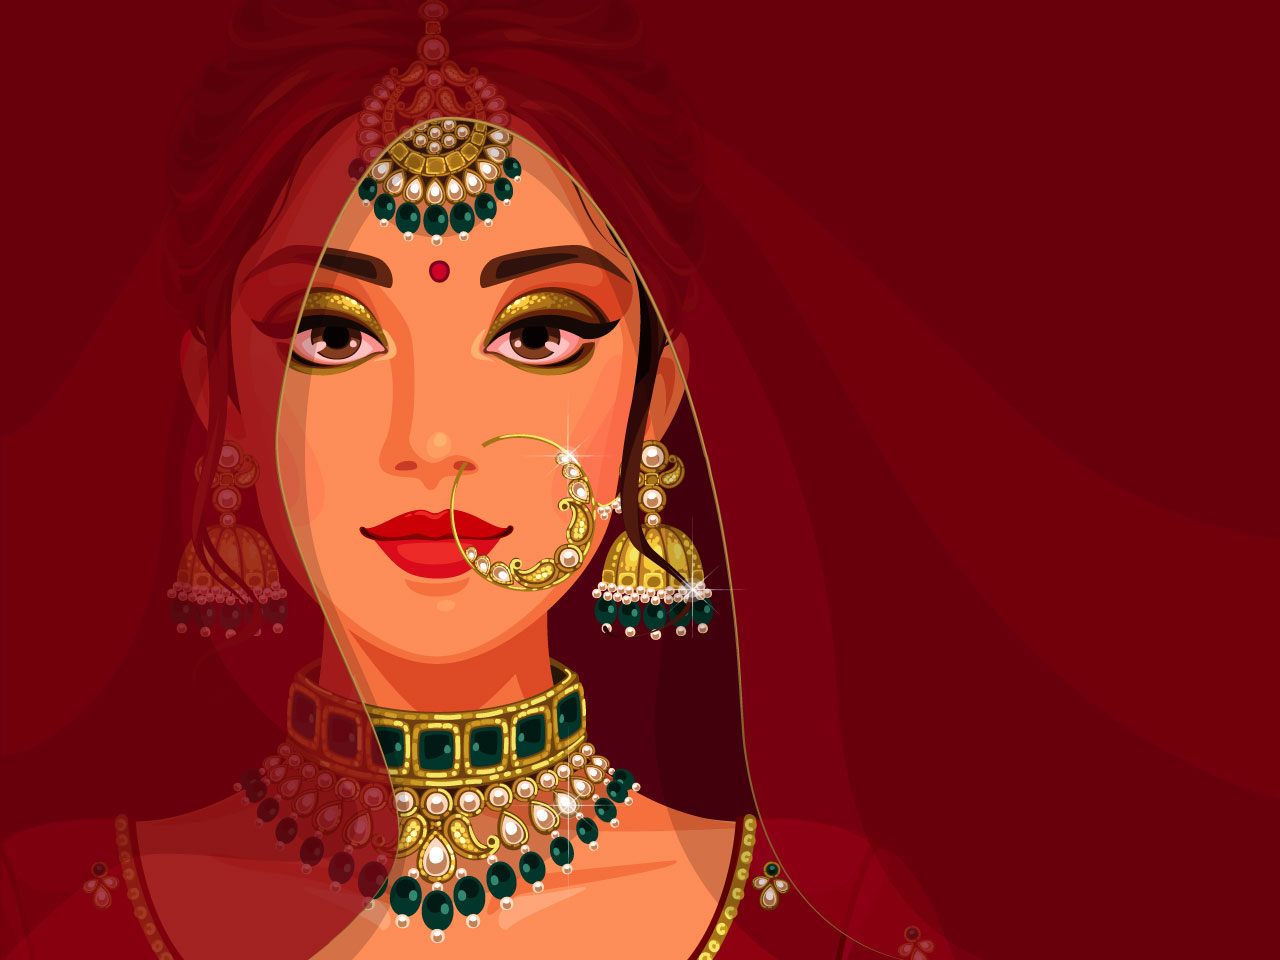 D'source Design Gallery on An Indian Wedding - Drawings of Rituals and  Ceremonies | D'source Digital Online Learning Environment for Design:  Courses, Resources, Case Studies, Galleries, Videos